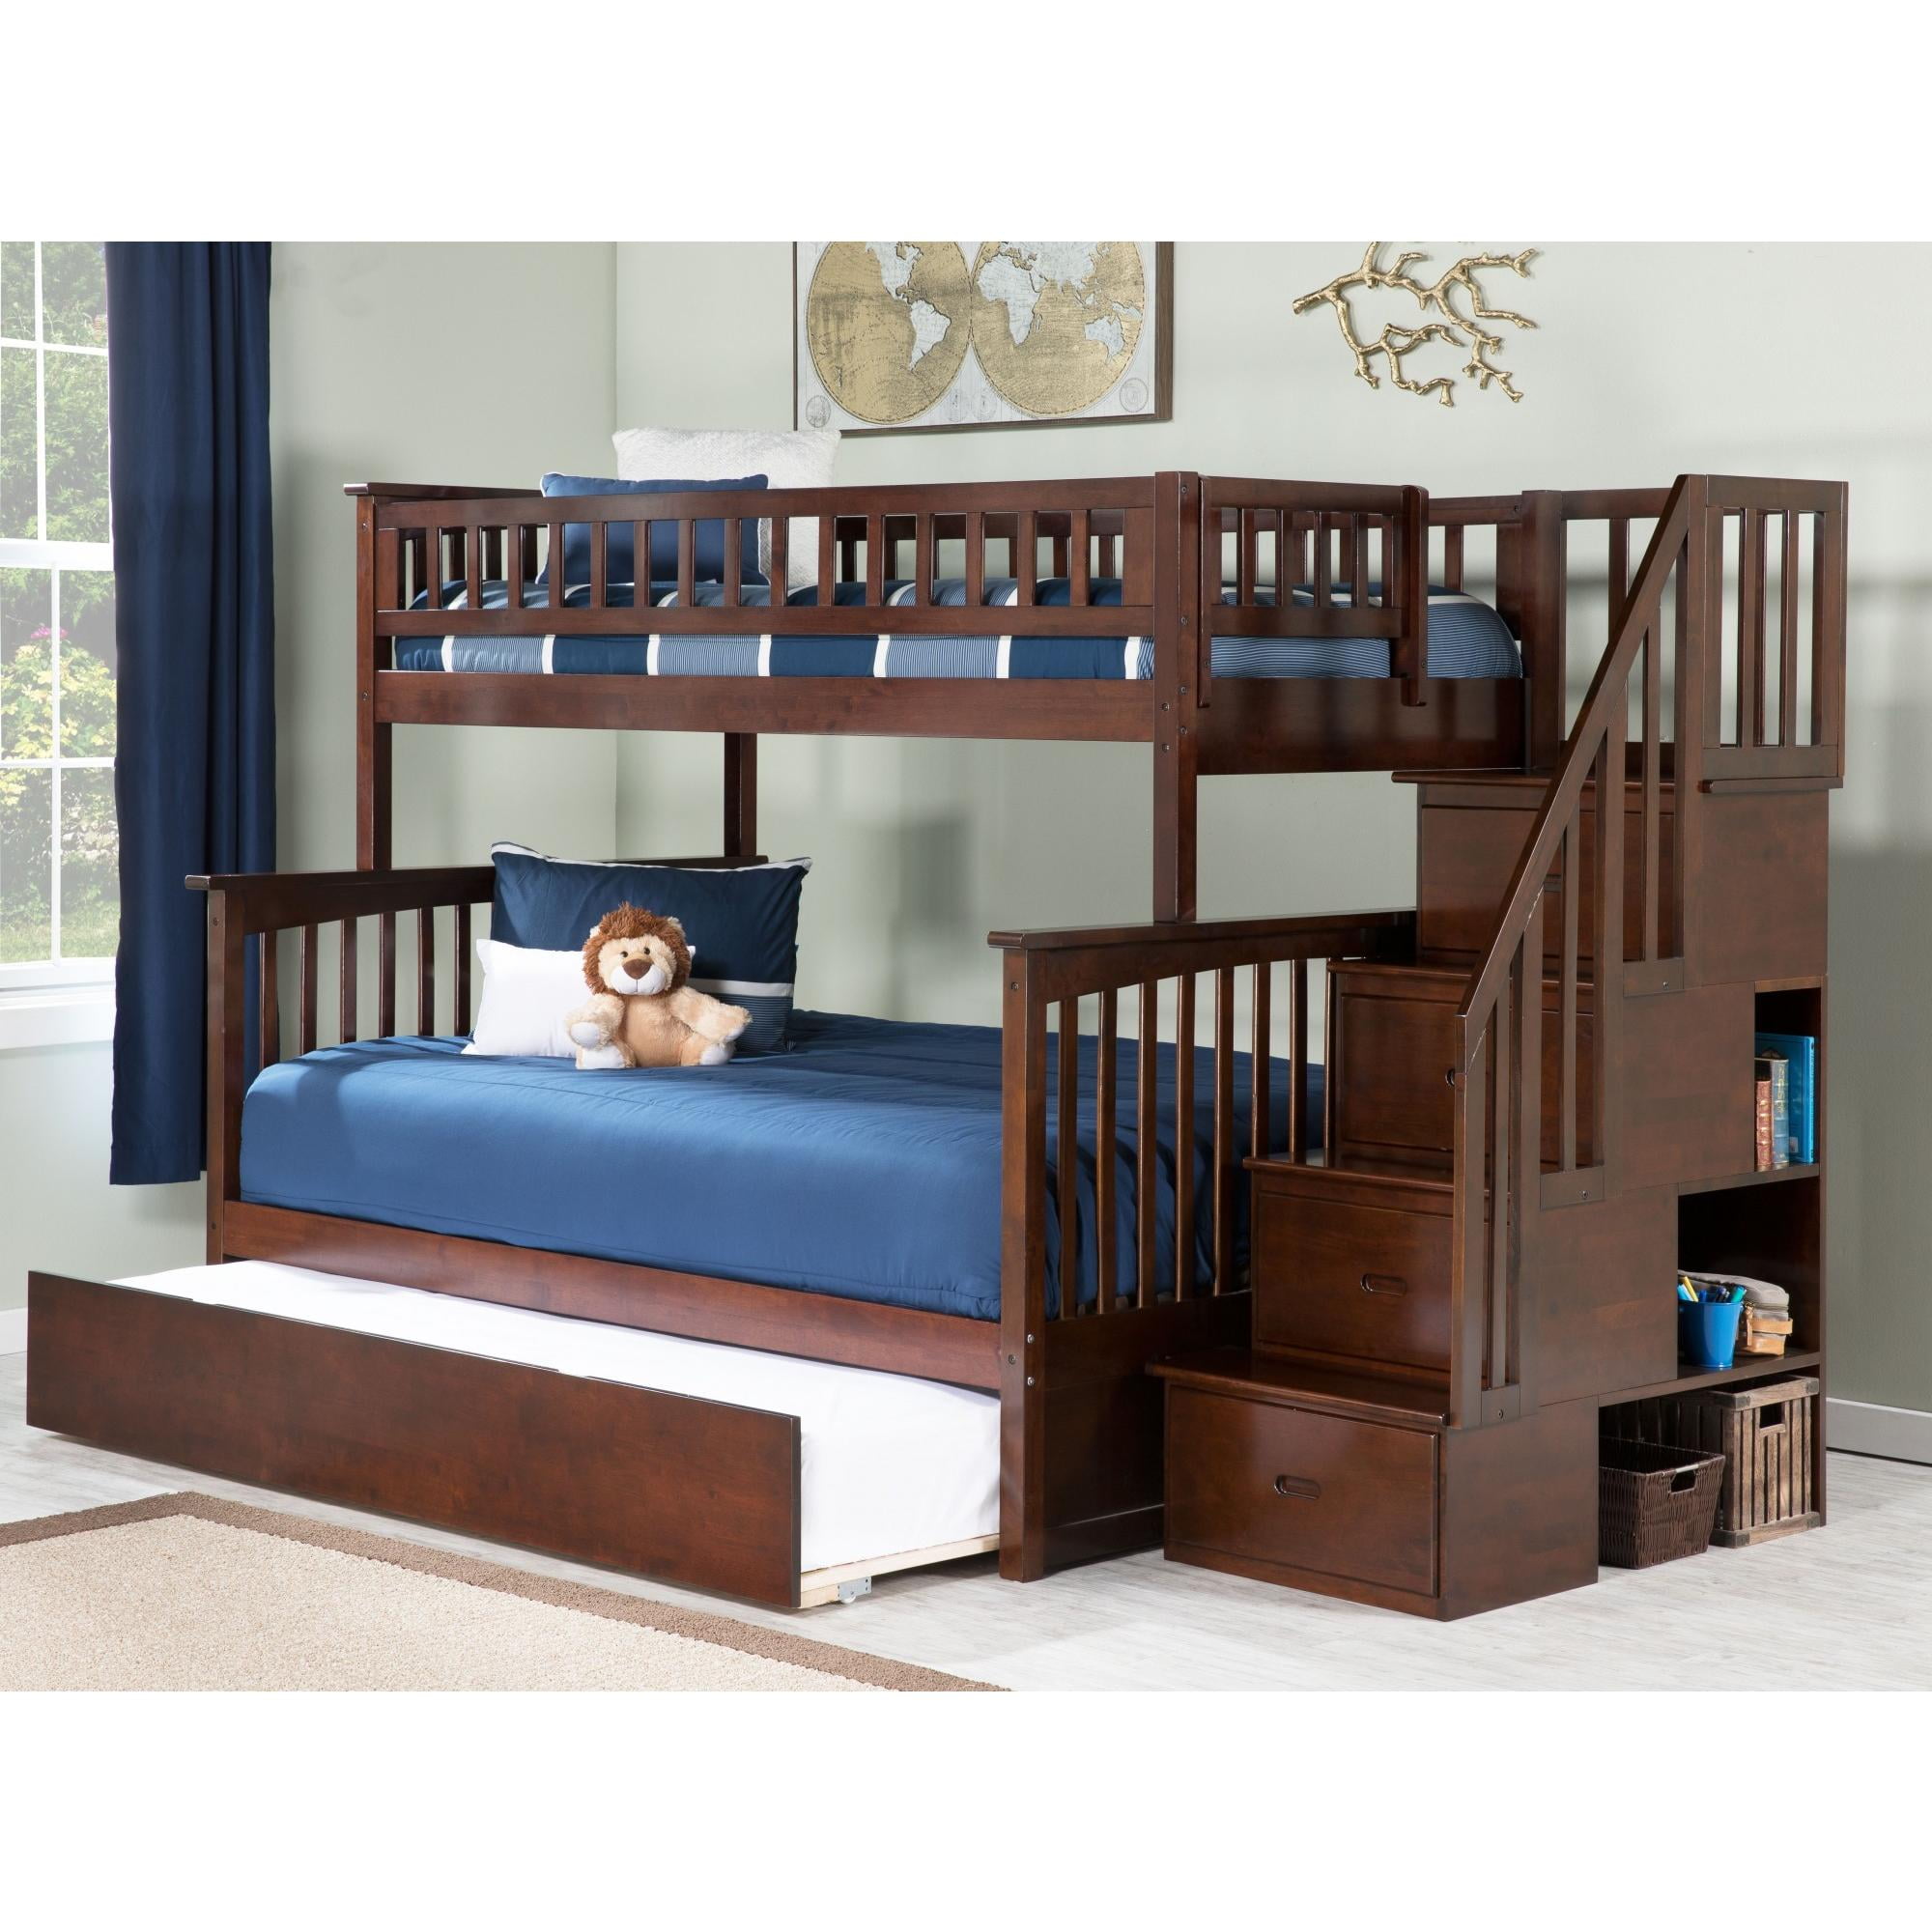 Columbia Staircase Bunk Bed Twin Over, Twin Over Full Stairs Bunk Bed With Trundle